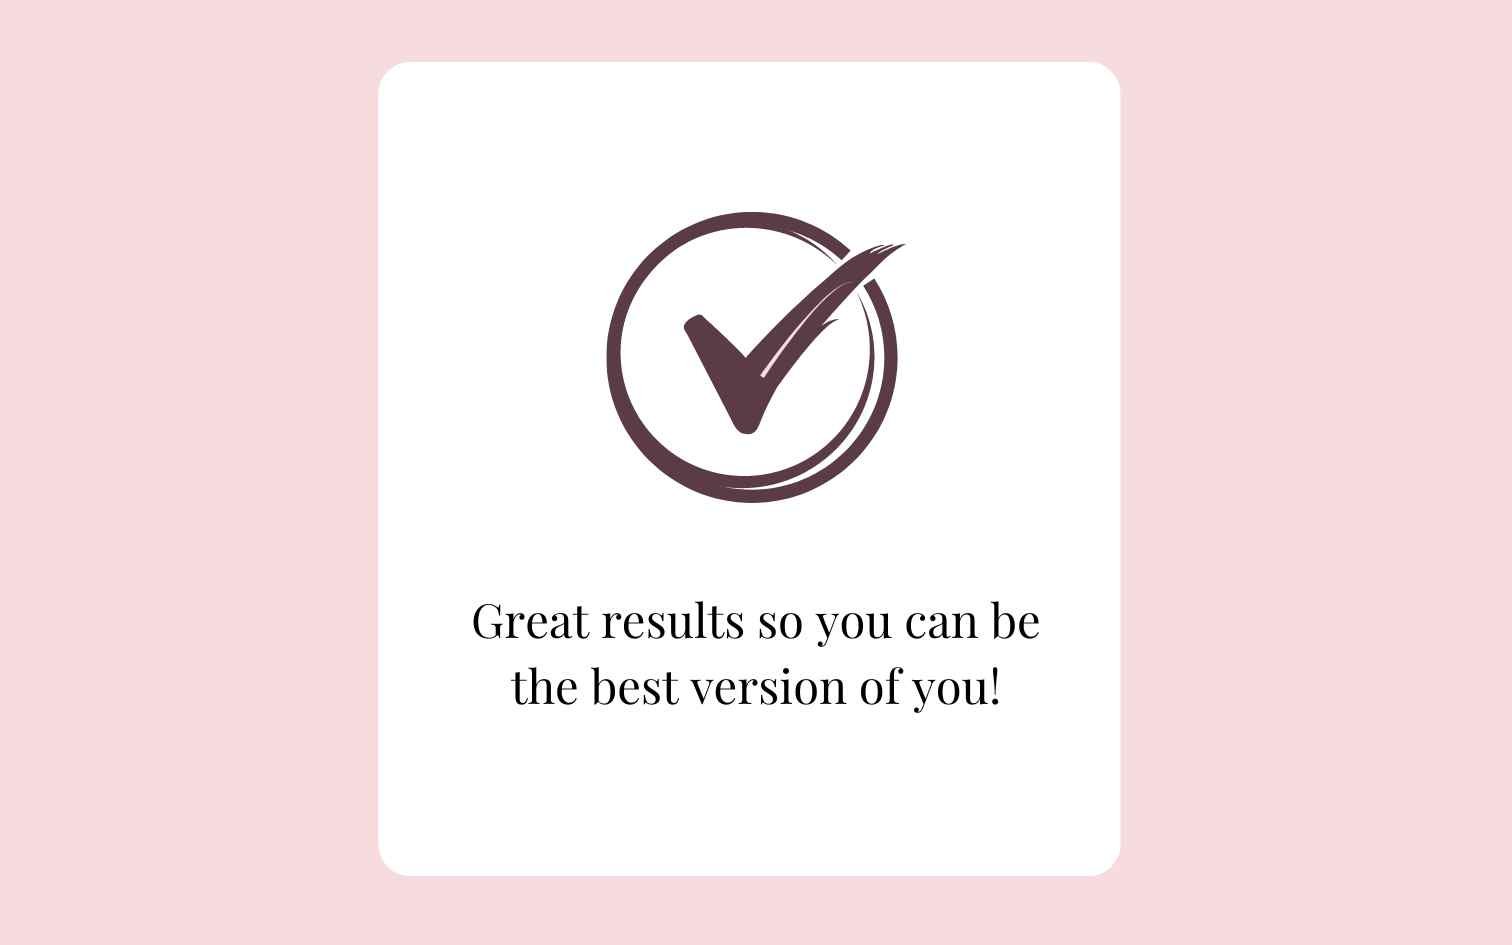 Great results so you can be the best version of you!